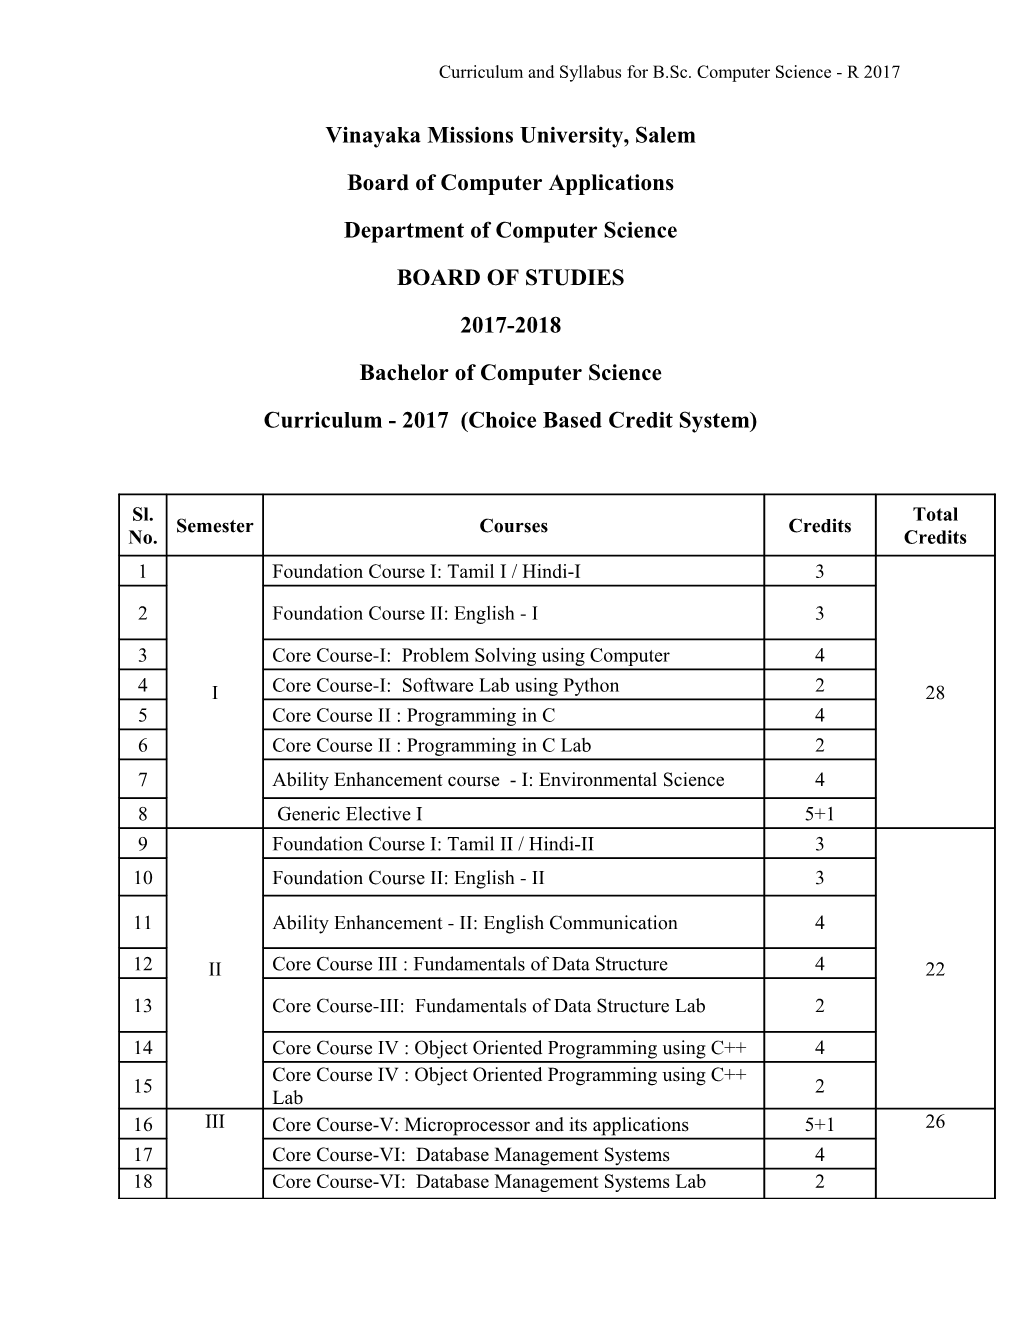 Curriculum and Syllabus for B.Sc. Computer Science - R 2017